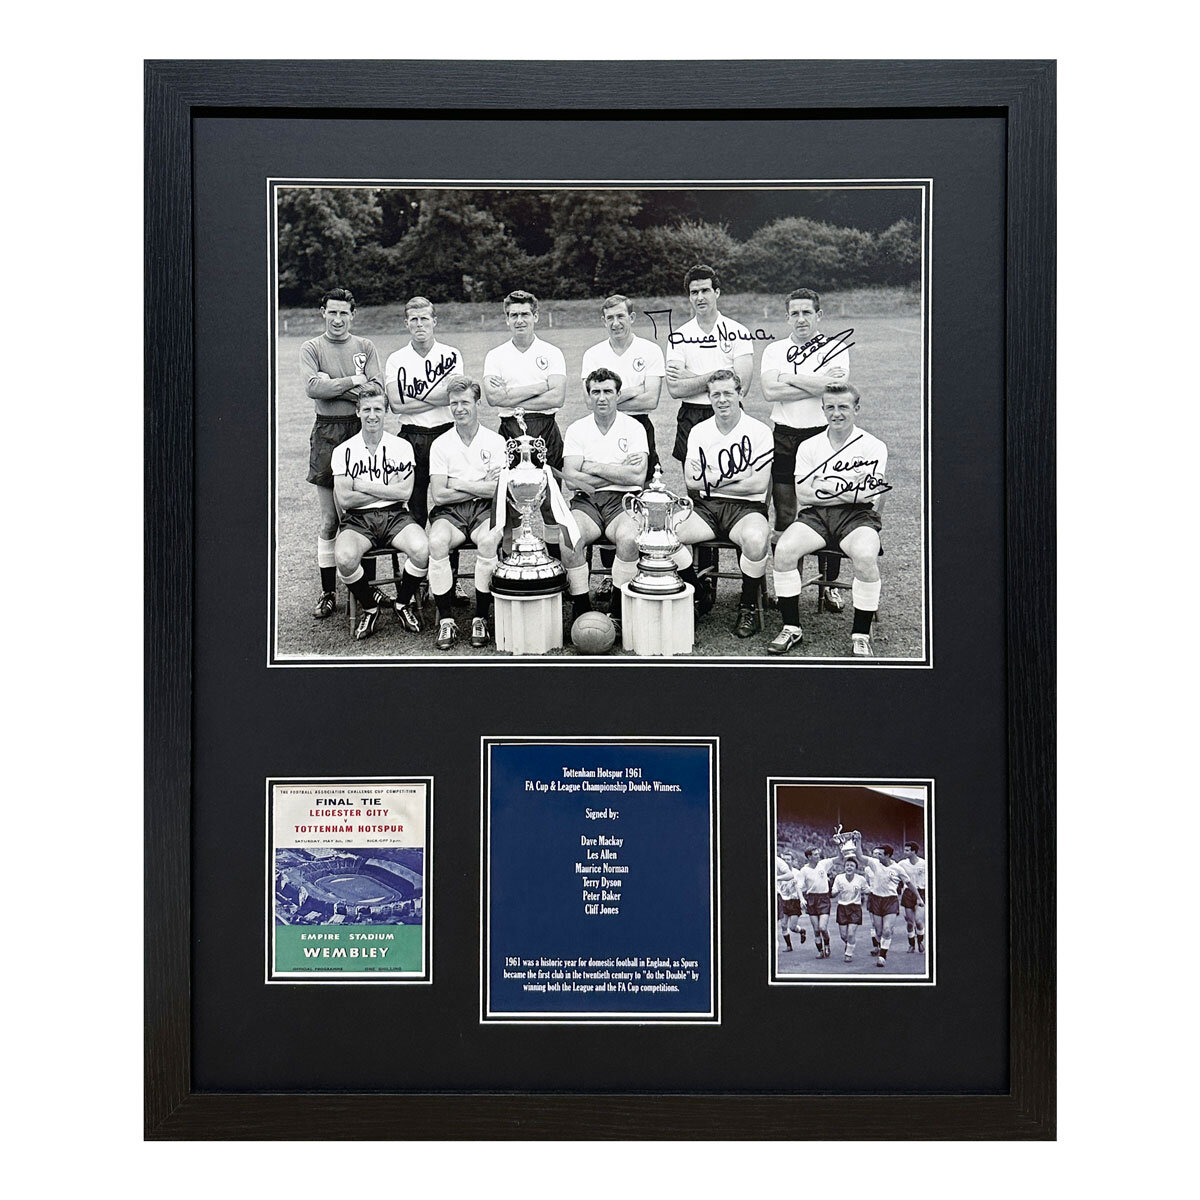 Tottenham 1961 Double Winners photo signed by 6